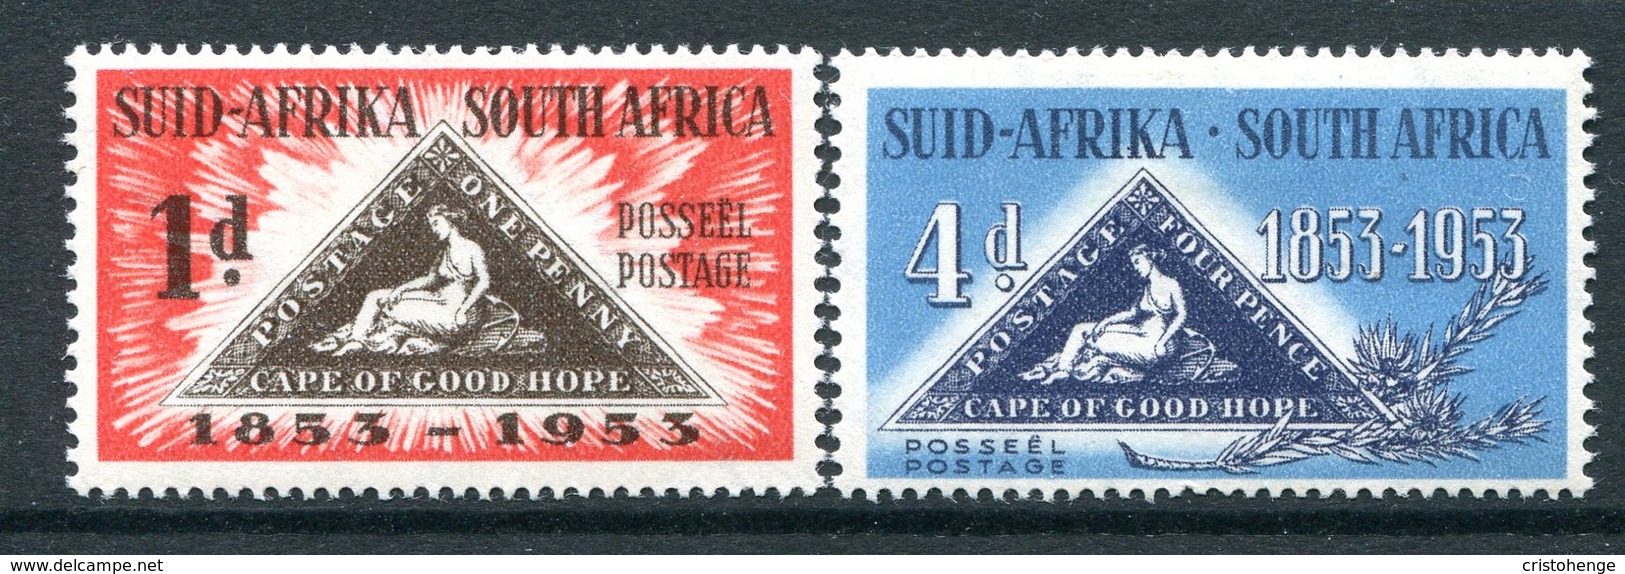 South Africa 1953 Centenary Of First Cape Of Good Hope Stamps Set HM (SG 144-145) - Unused Stamps